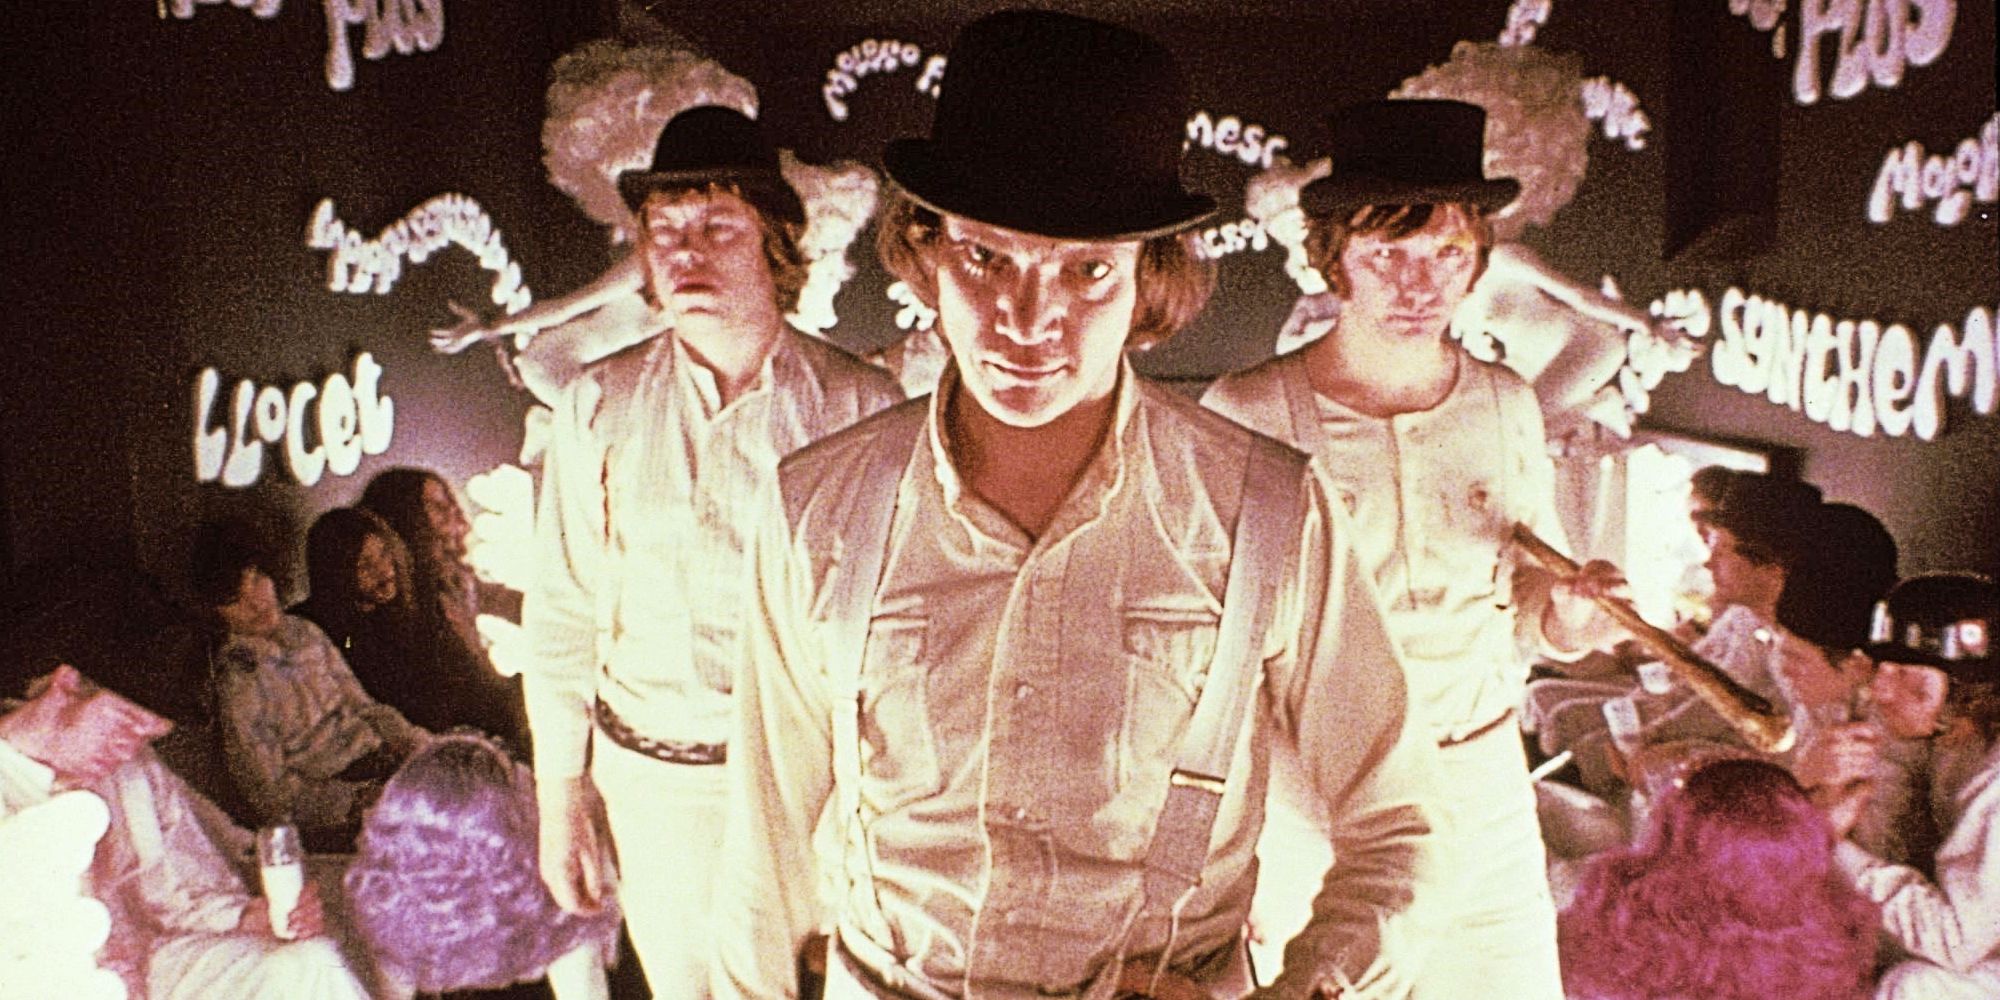 A Clockwork Orange Controversy Explained: Why It Was Banned